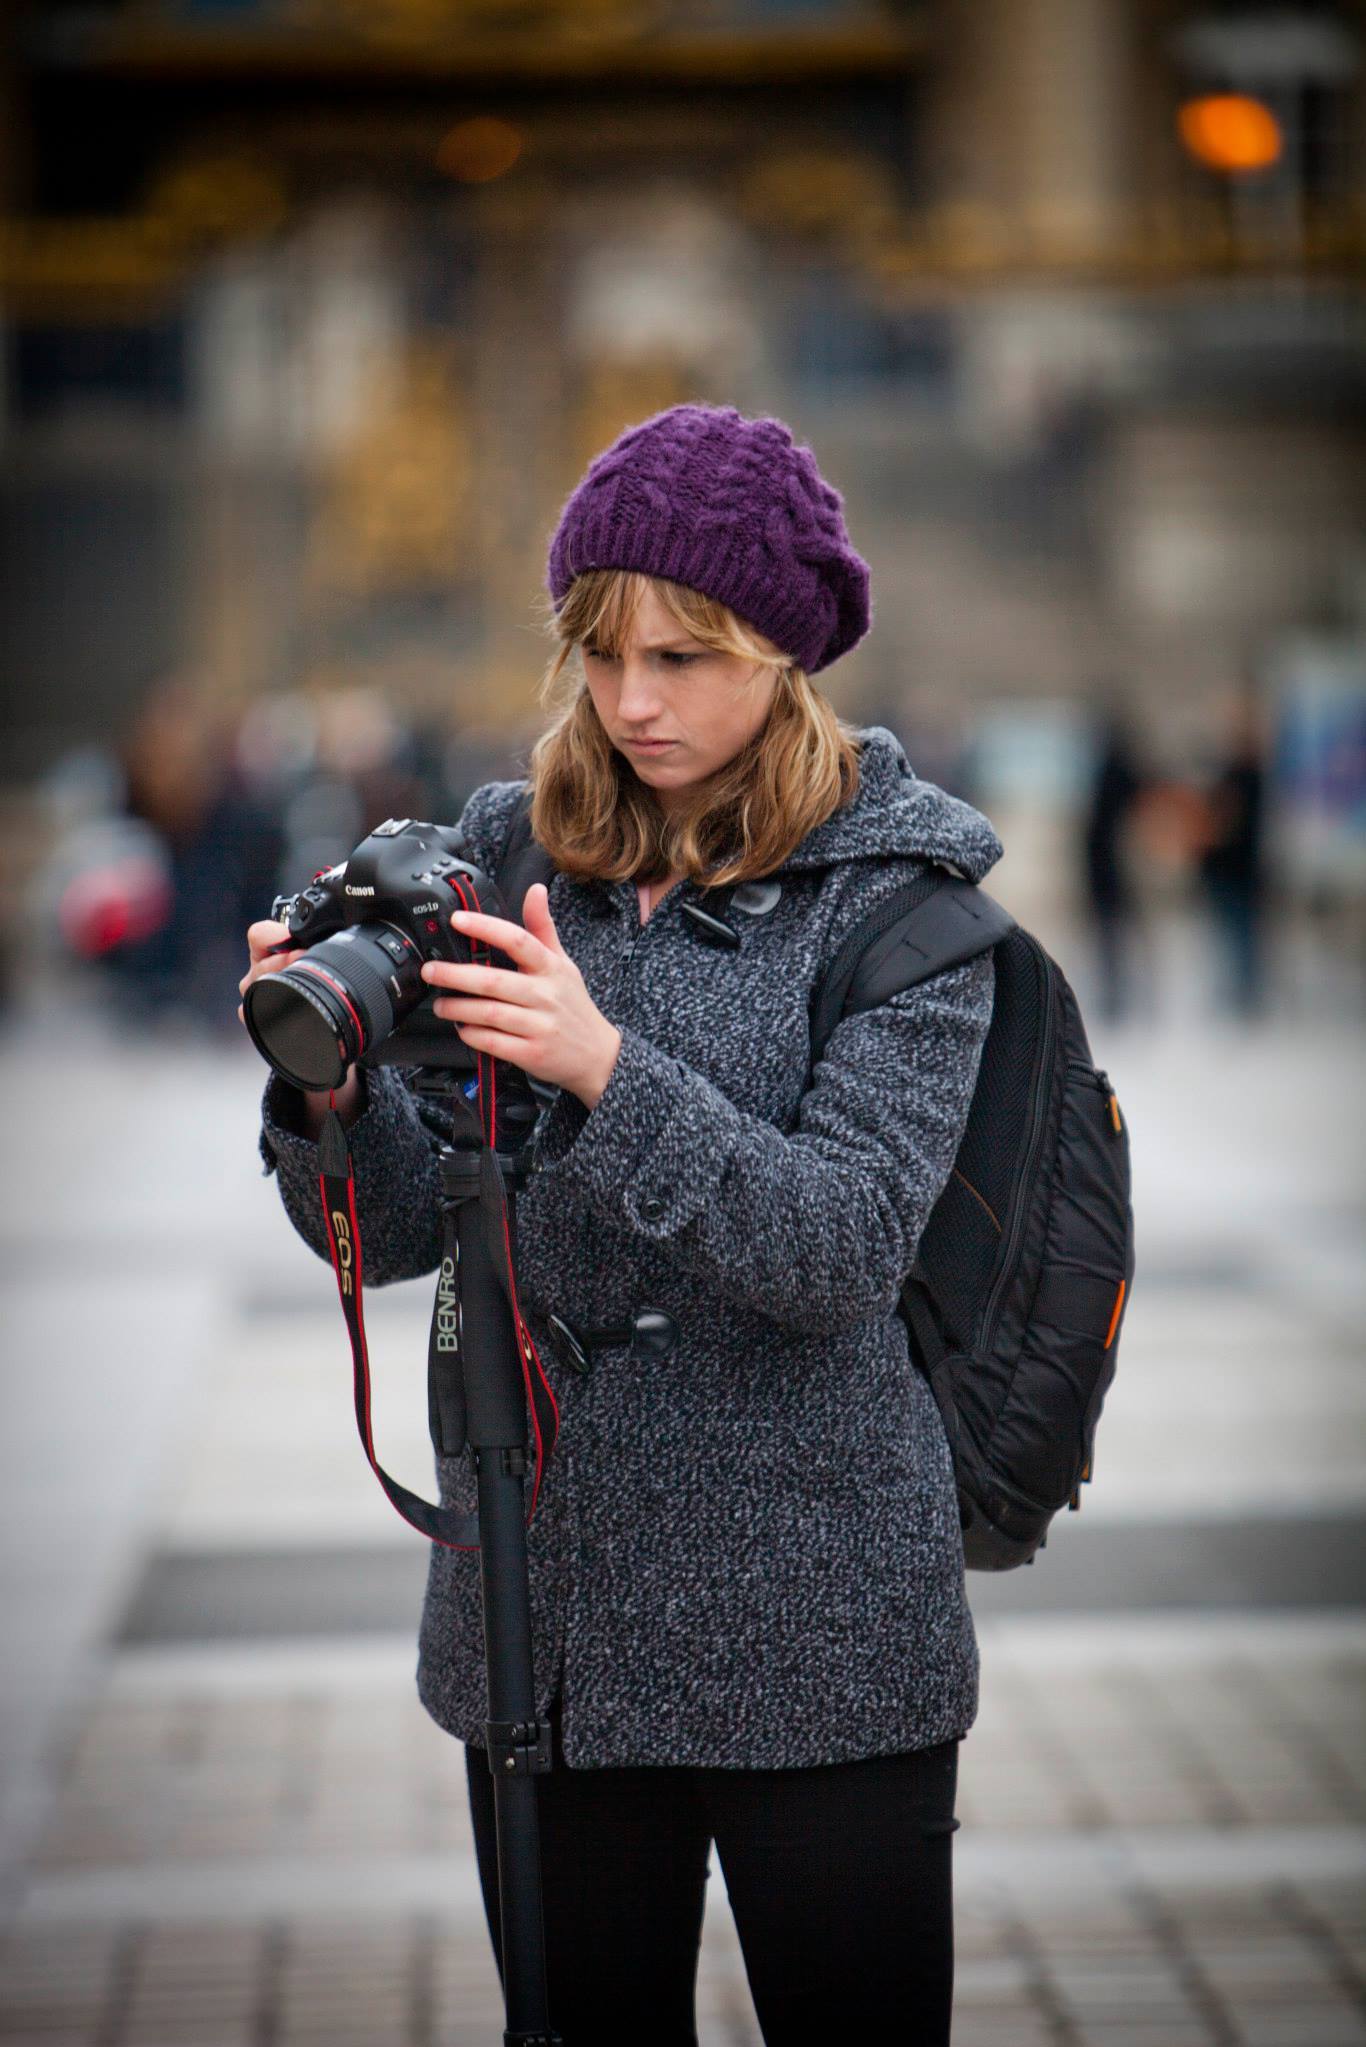 Shooting in Paris with the Canon 1DC